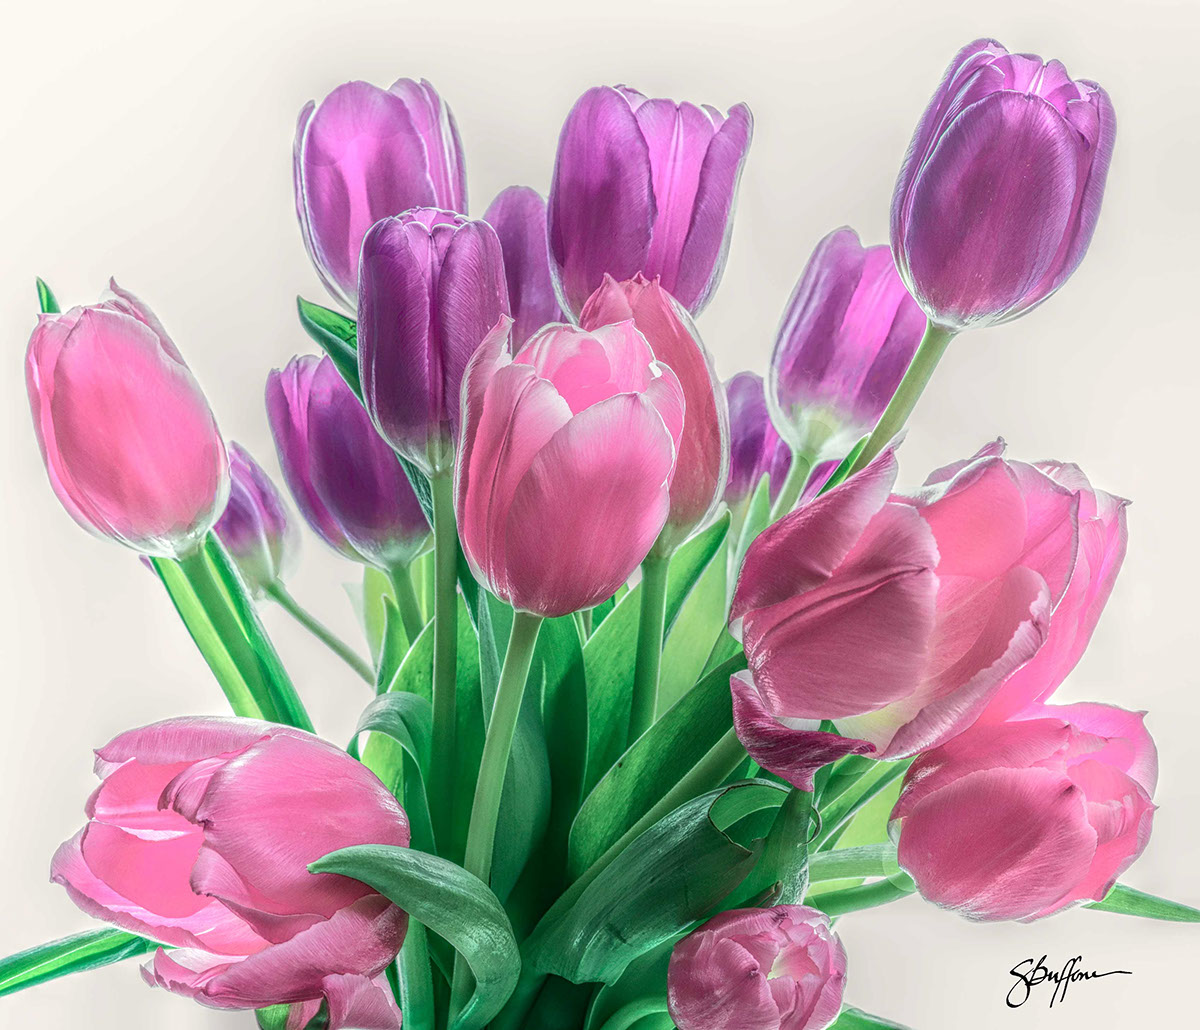 Tulips Highlighted on Behance